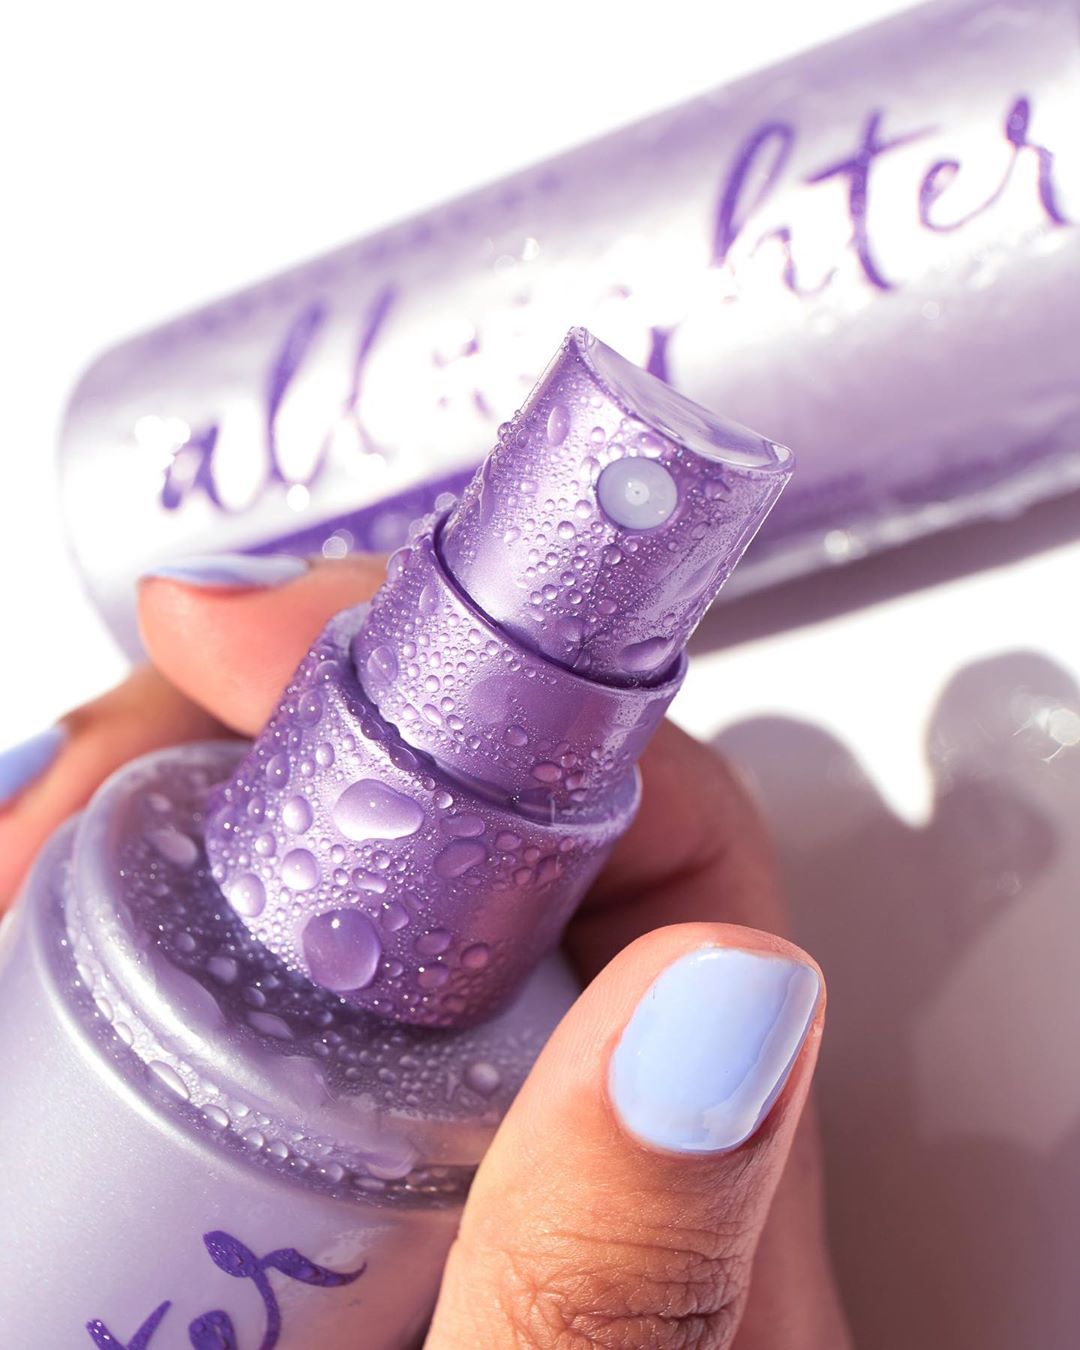 Urban Decay Cosmetics - Give us alllllll the JUICE! 💦 Our all-new All Nighter Ultra Glow Setting Spray makes a splash with hyaluronic acid an agave extract—plus, the makeup staying power to lock in yo...